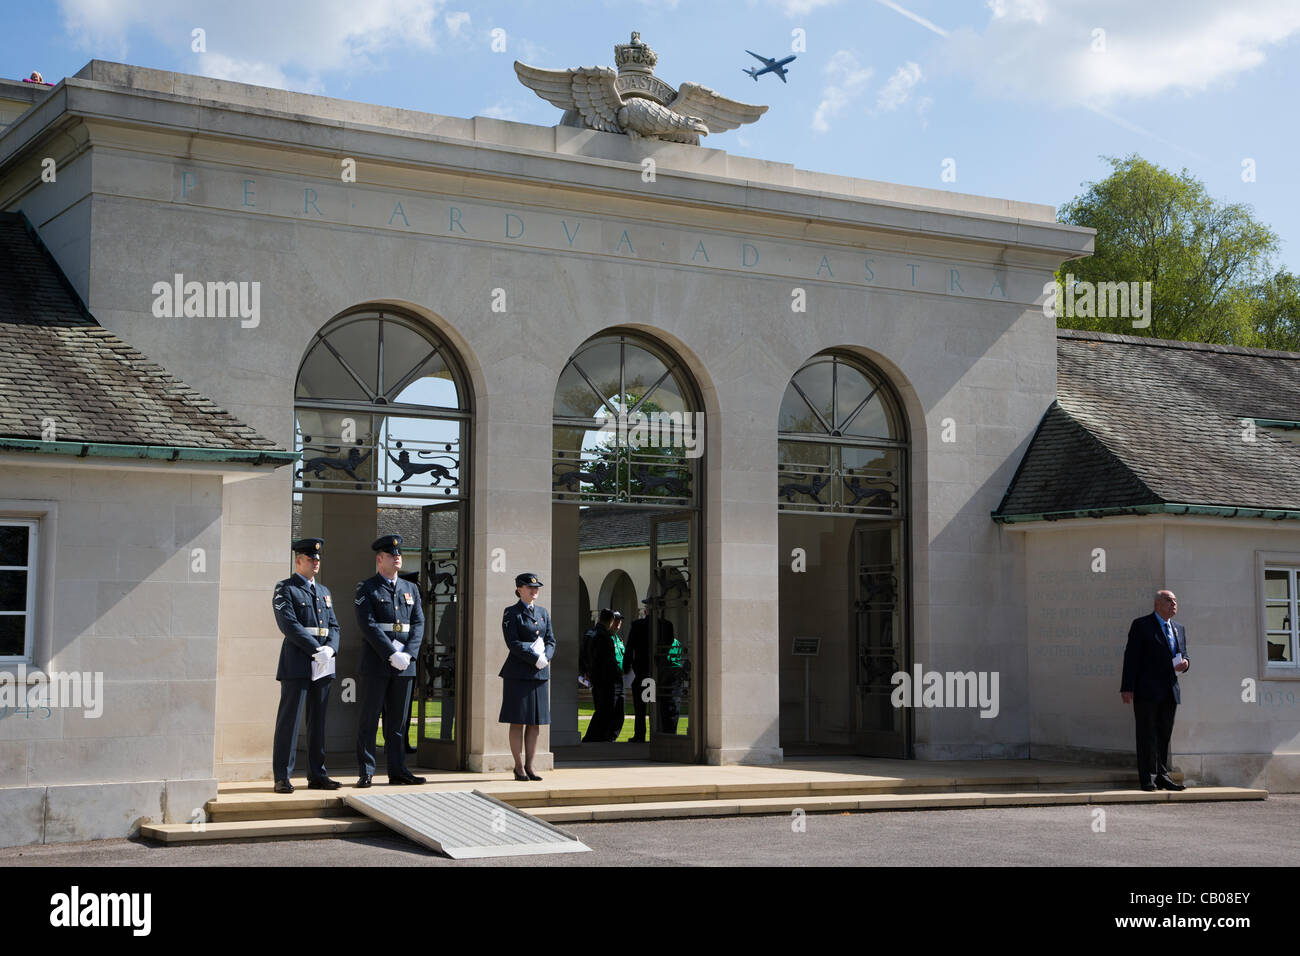 The main entrance of the Runnymede Commonwealth Air Forces Memorial overlooked by the RAF Eagle while a jet aircraft flys overhead and RAF personnel wait to welcome attendees to the Memorial Service held at Egham, England on the 13th May'12 Stock Photo